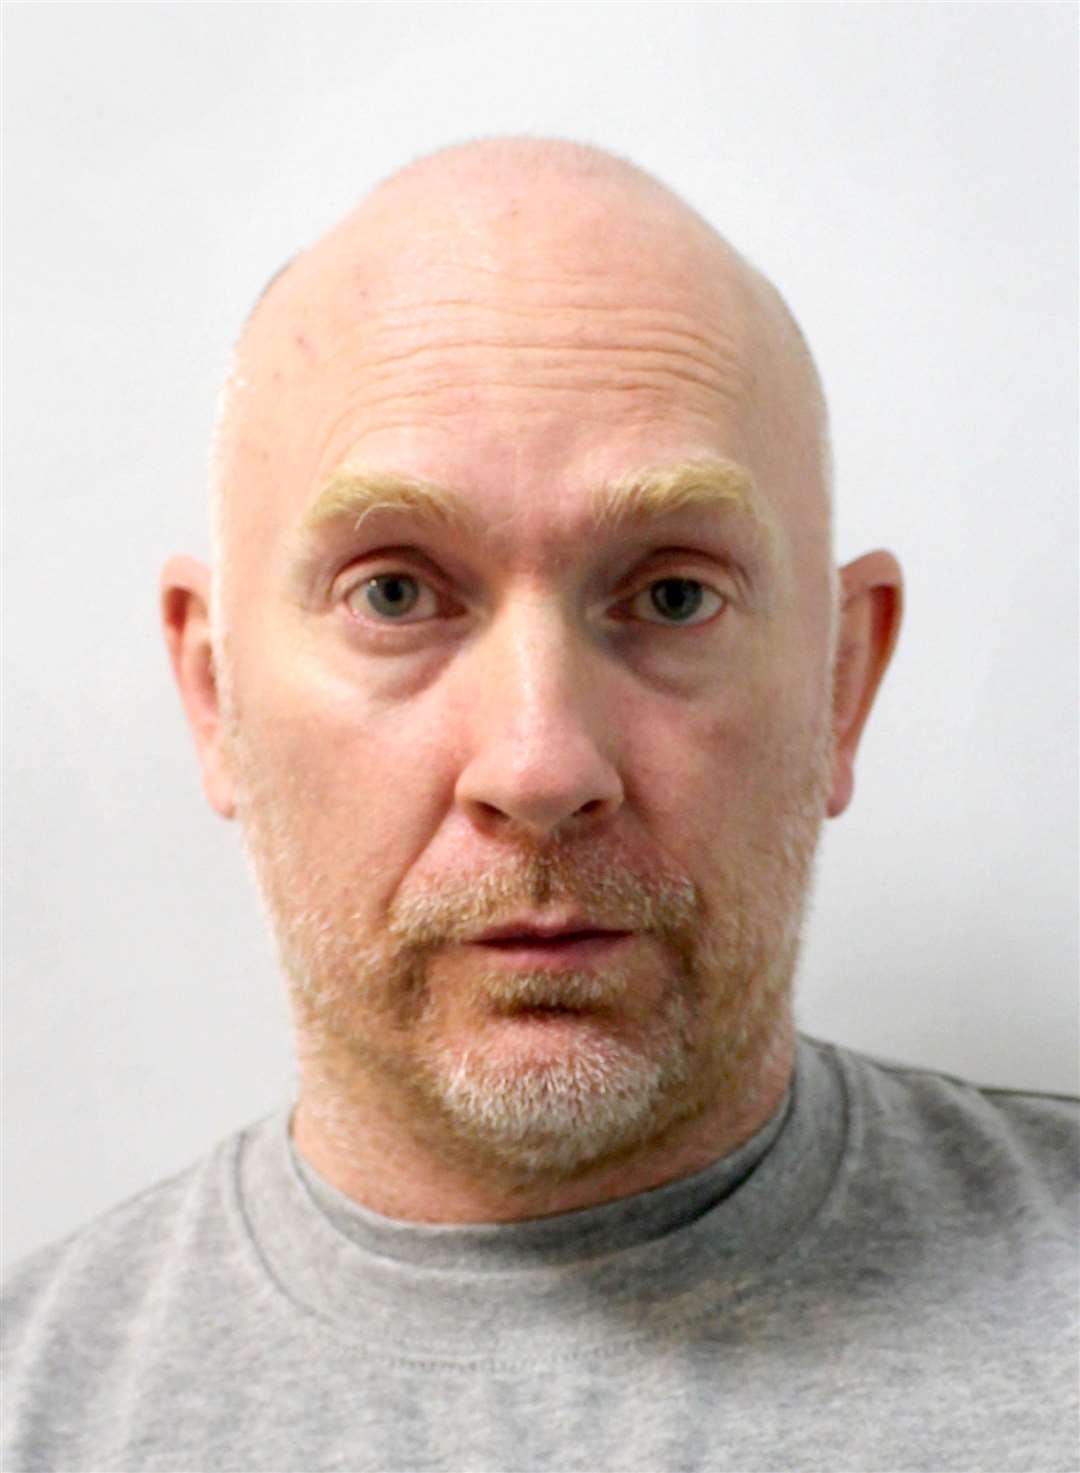 Sarah Everard’s killer Wayne Couzens pleaded guilty to three counts of indecent exposure between November 2020 and February 2021 (Met Police/PA)